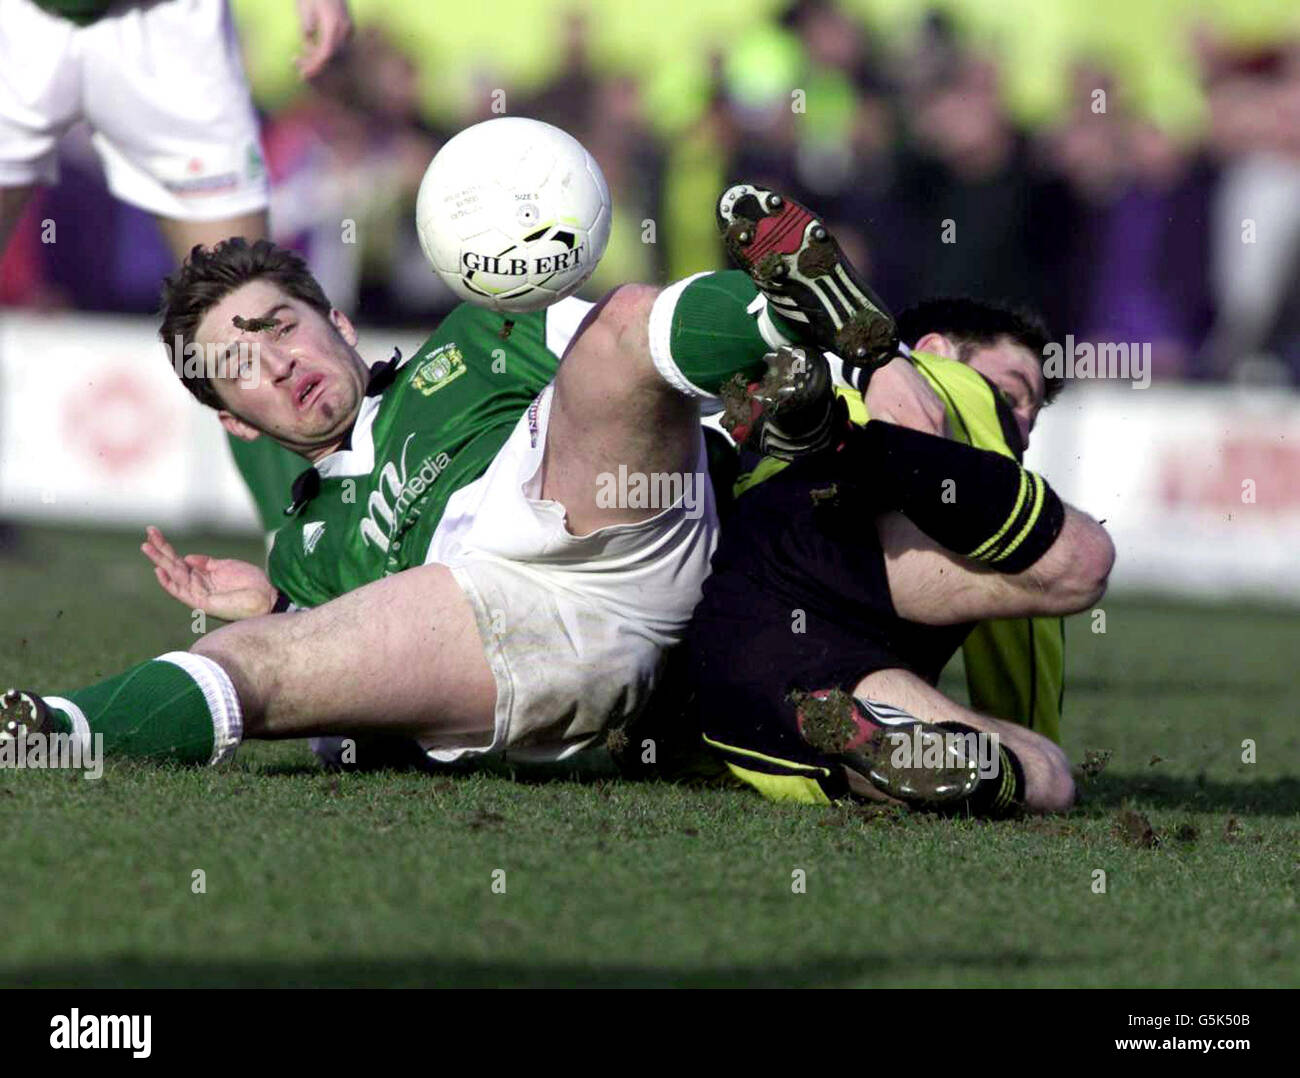 Burton v Yeovil - Burton's Pat Lyons and Yeovil's Ben Smith get tangled up in the Burton v Yeovil game at Coventry.. NO UNOFFICIAL CLUB WEBSITE USE. Stock Photo